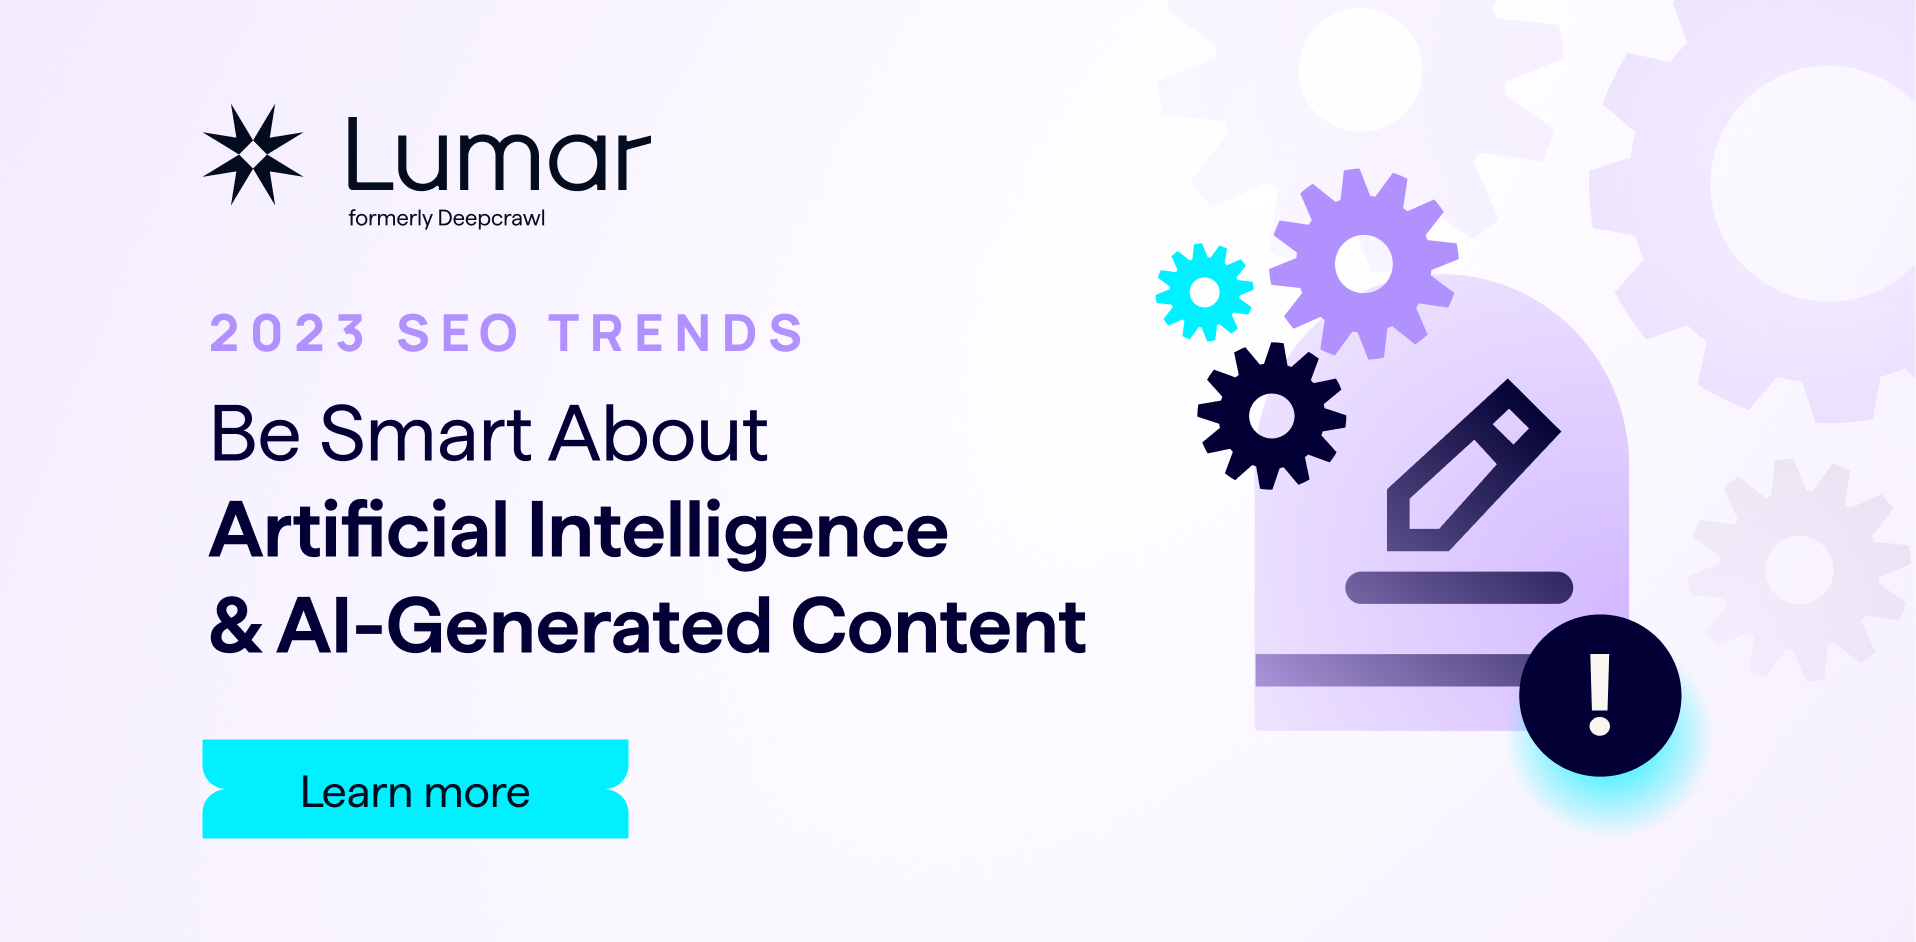 2023 SEO Trends: Be Smart About Artificial Intelligence & AI-Generated Content